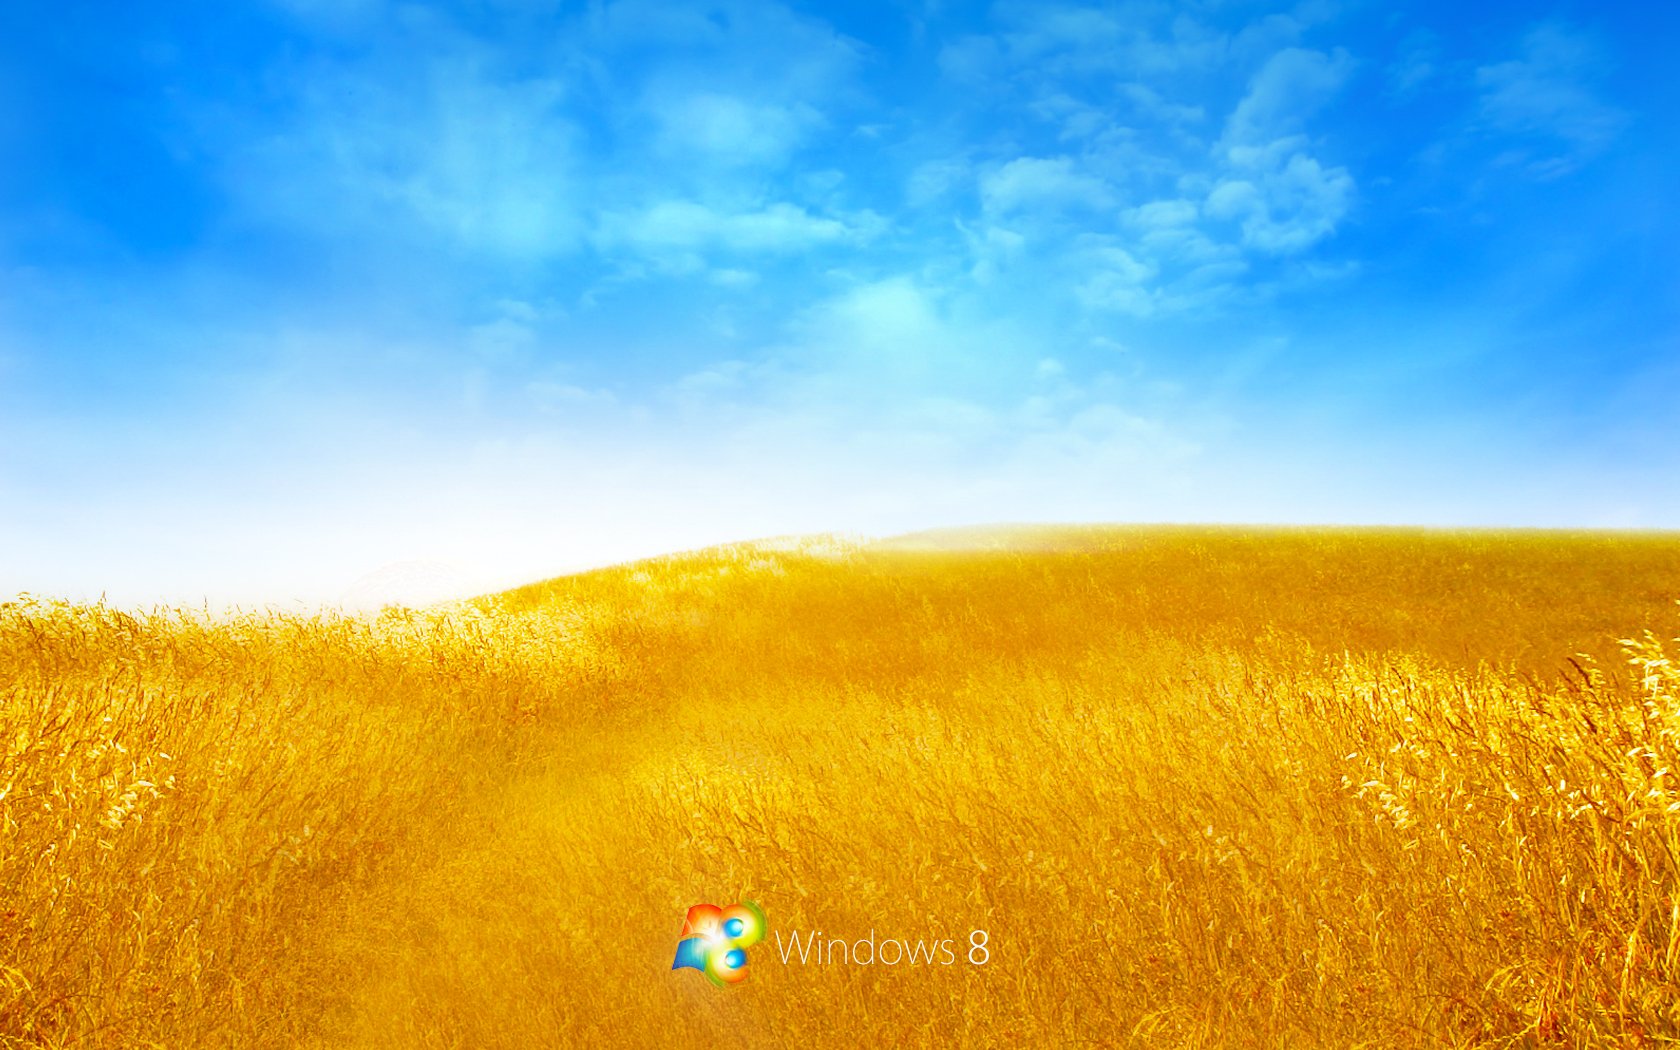 30 Beautiful Windows 8 Wallpapers in High Quality